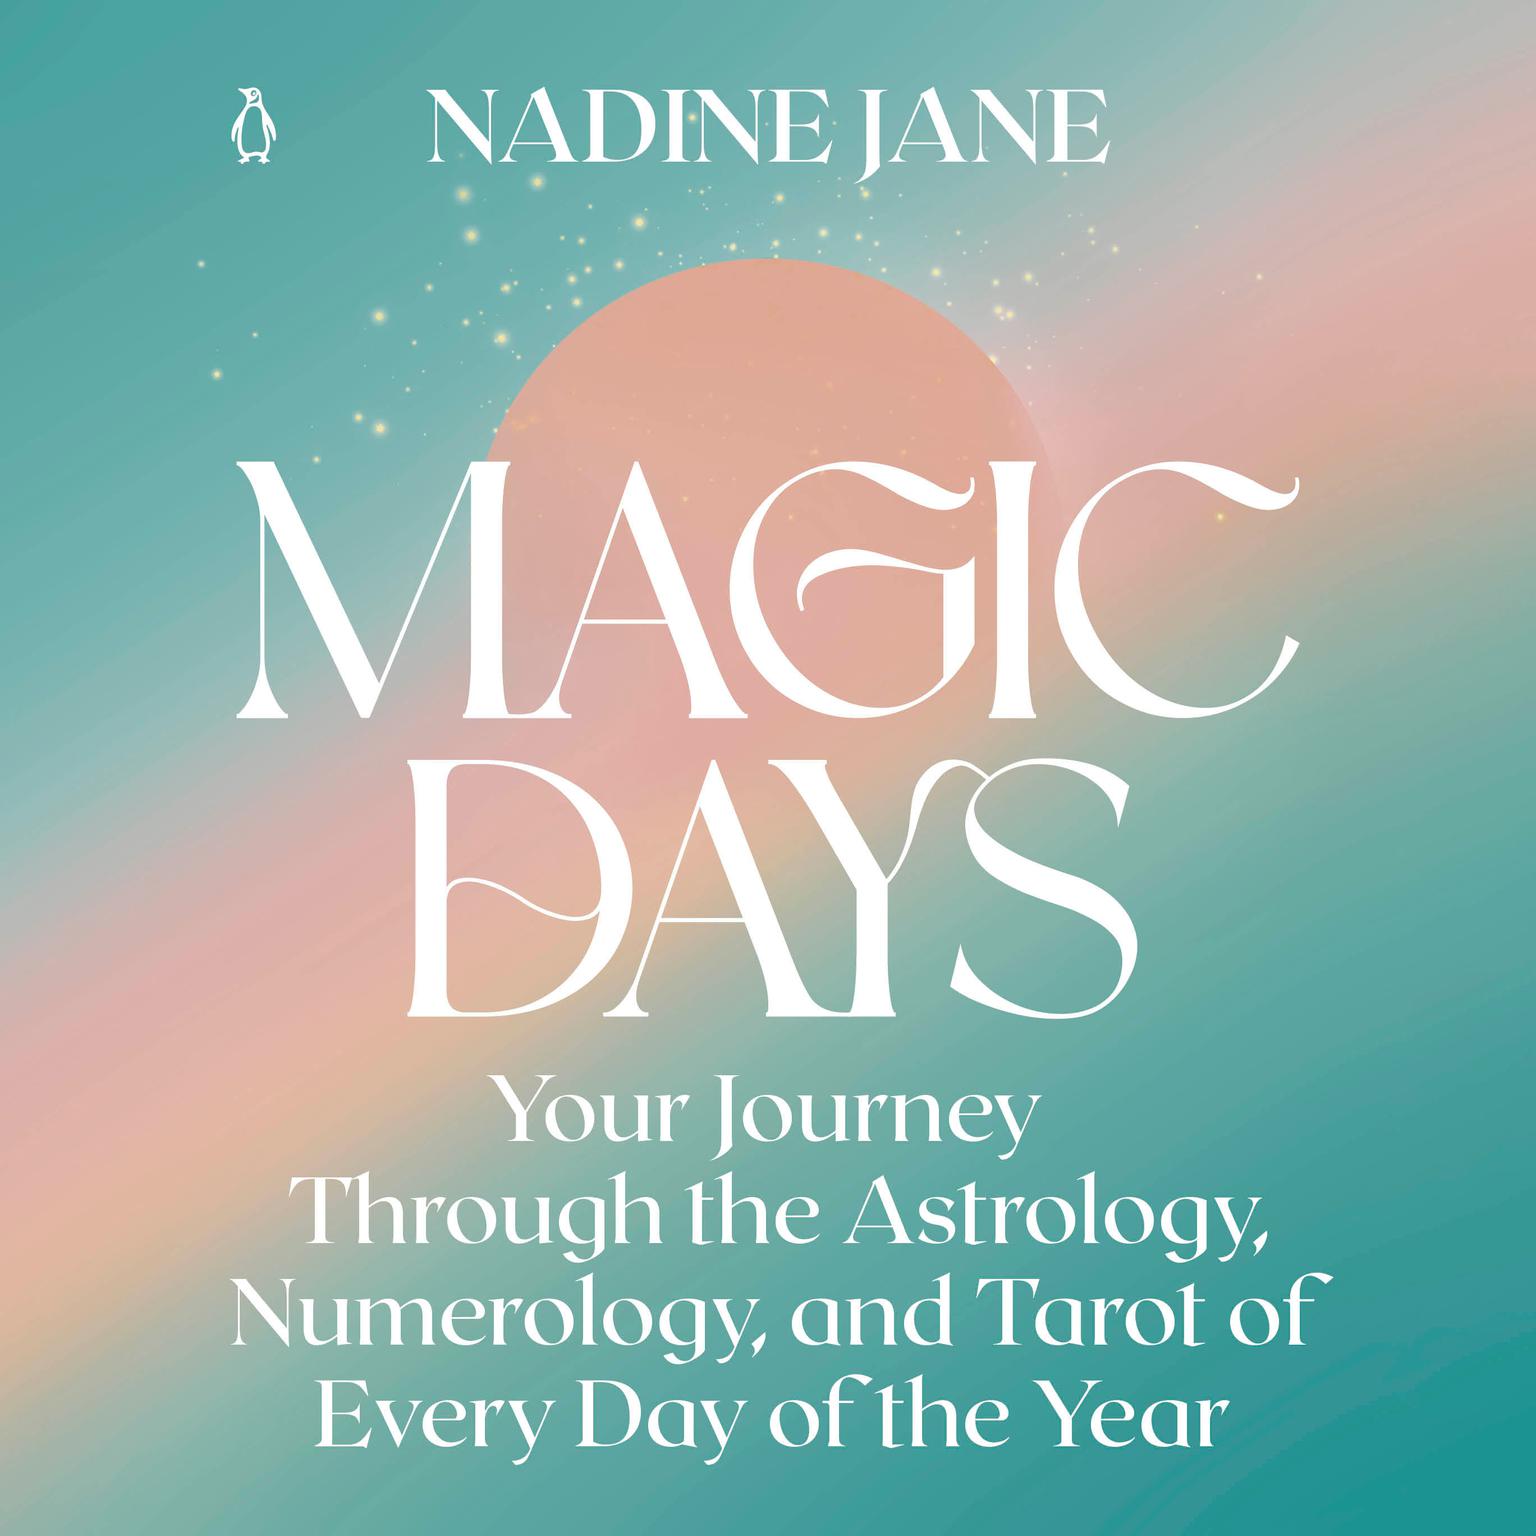 Magic Days: Your Journey Through the Astrology, Numerology, and Tarot of Every Day of the Year Audiobook, by Nadine Jane